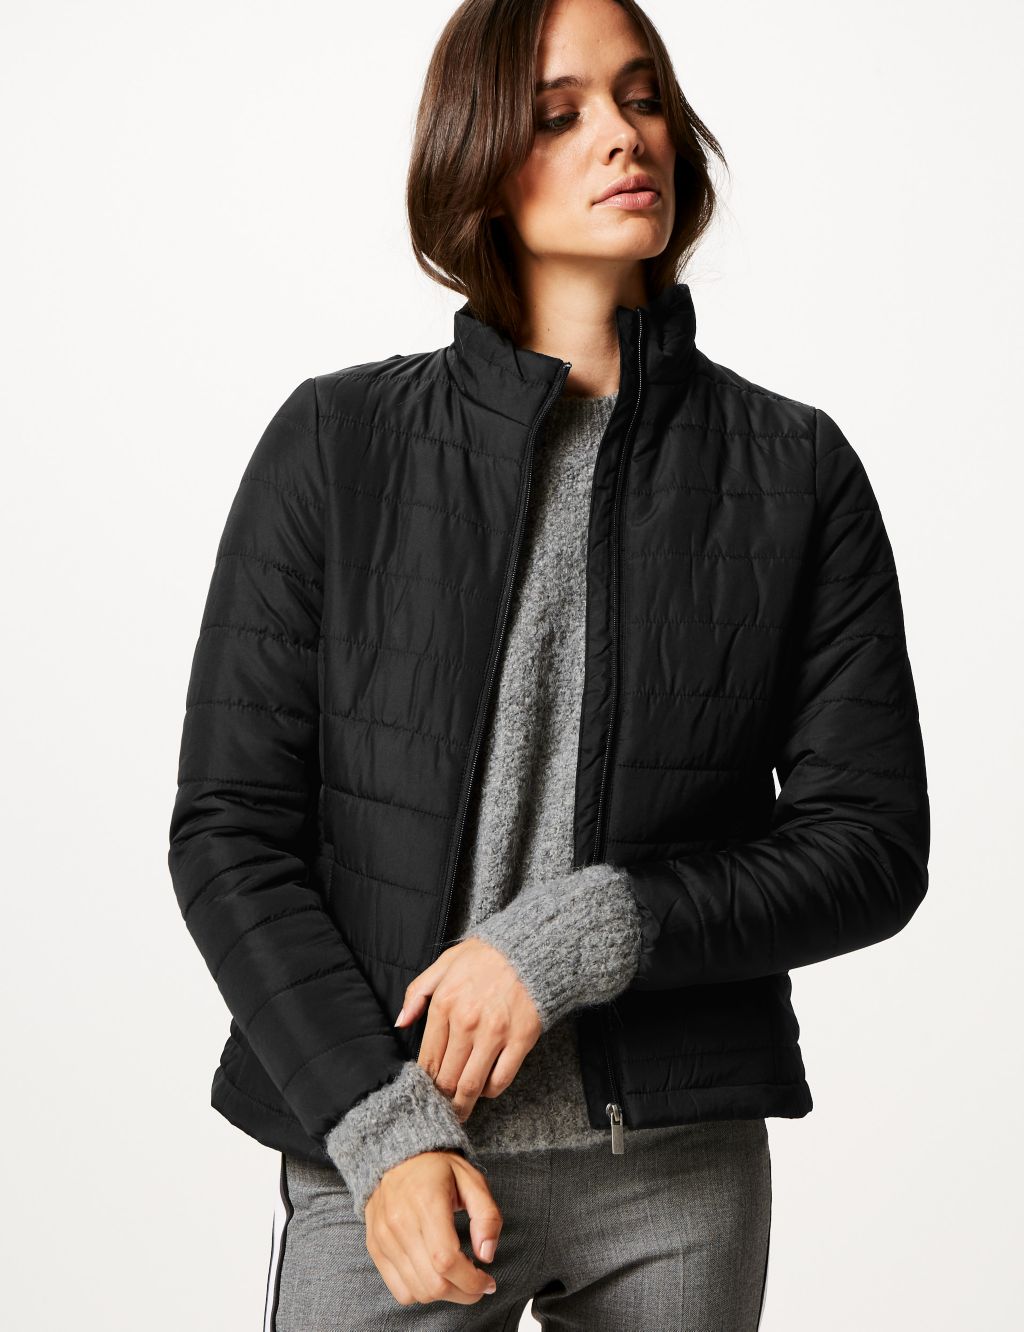 Padded Jacket | M&S Collection | M&S